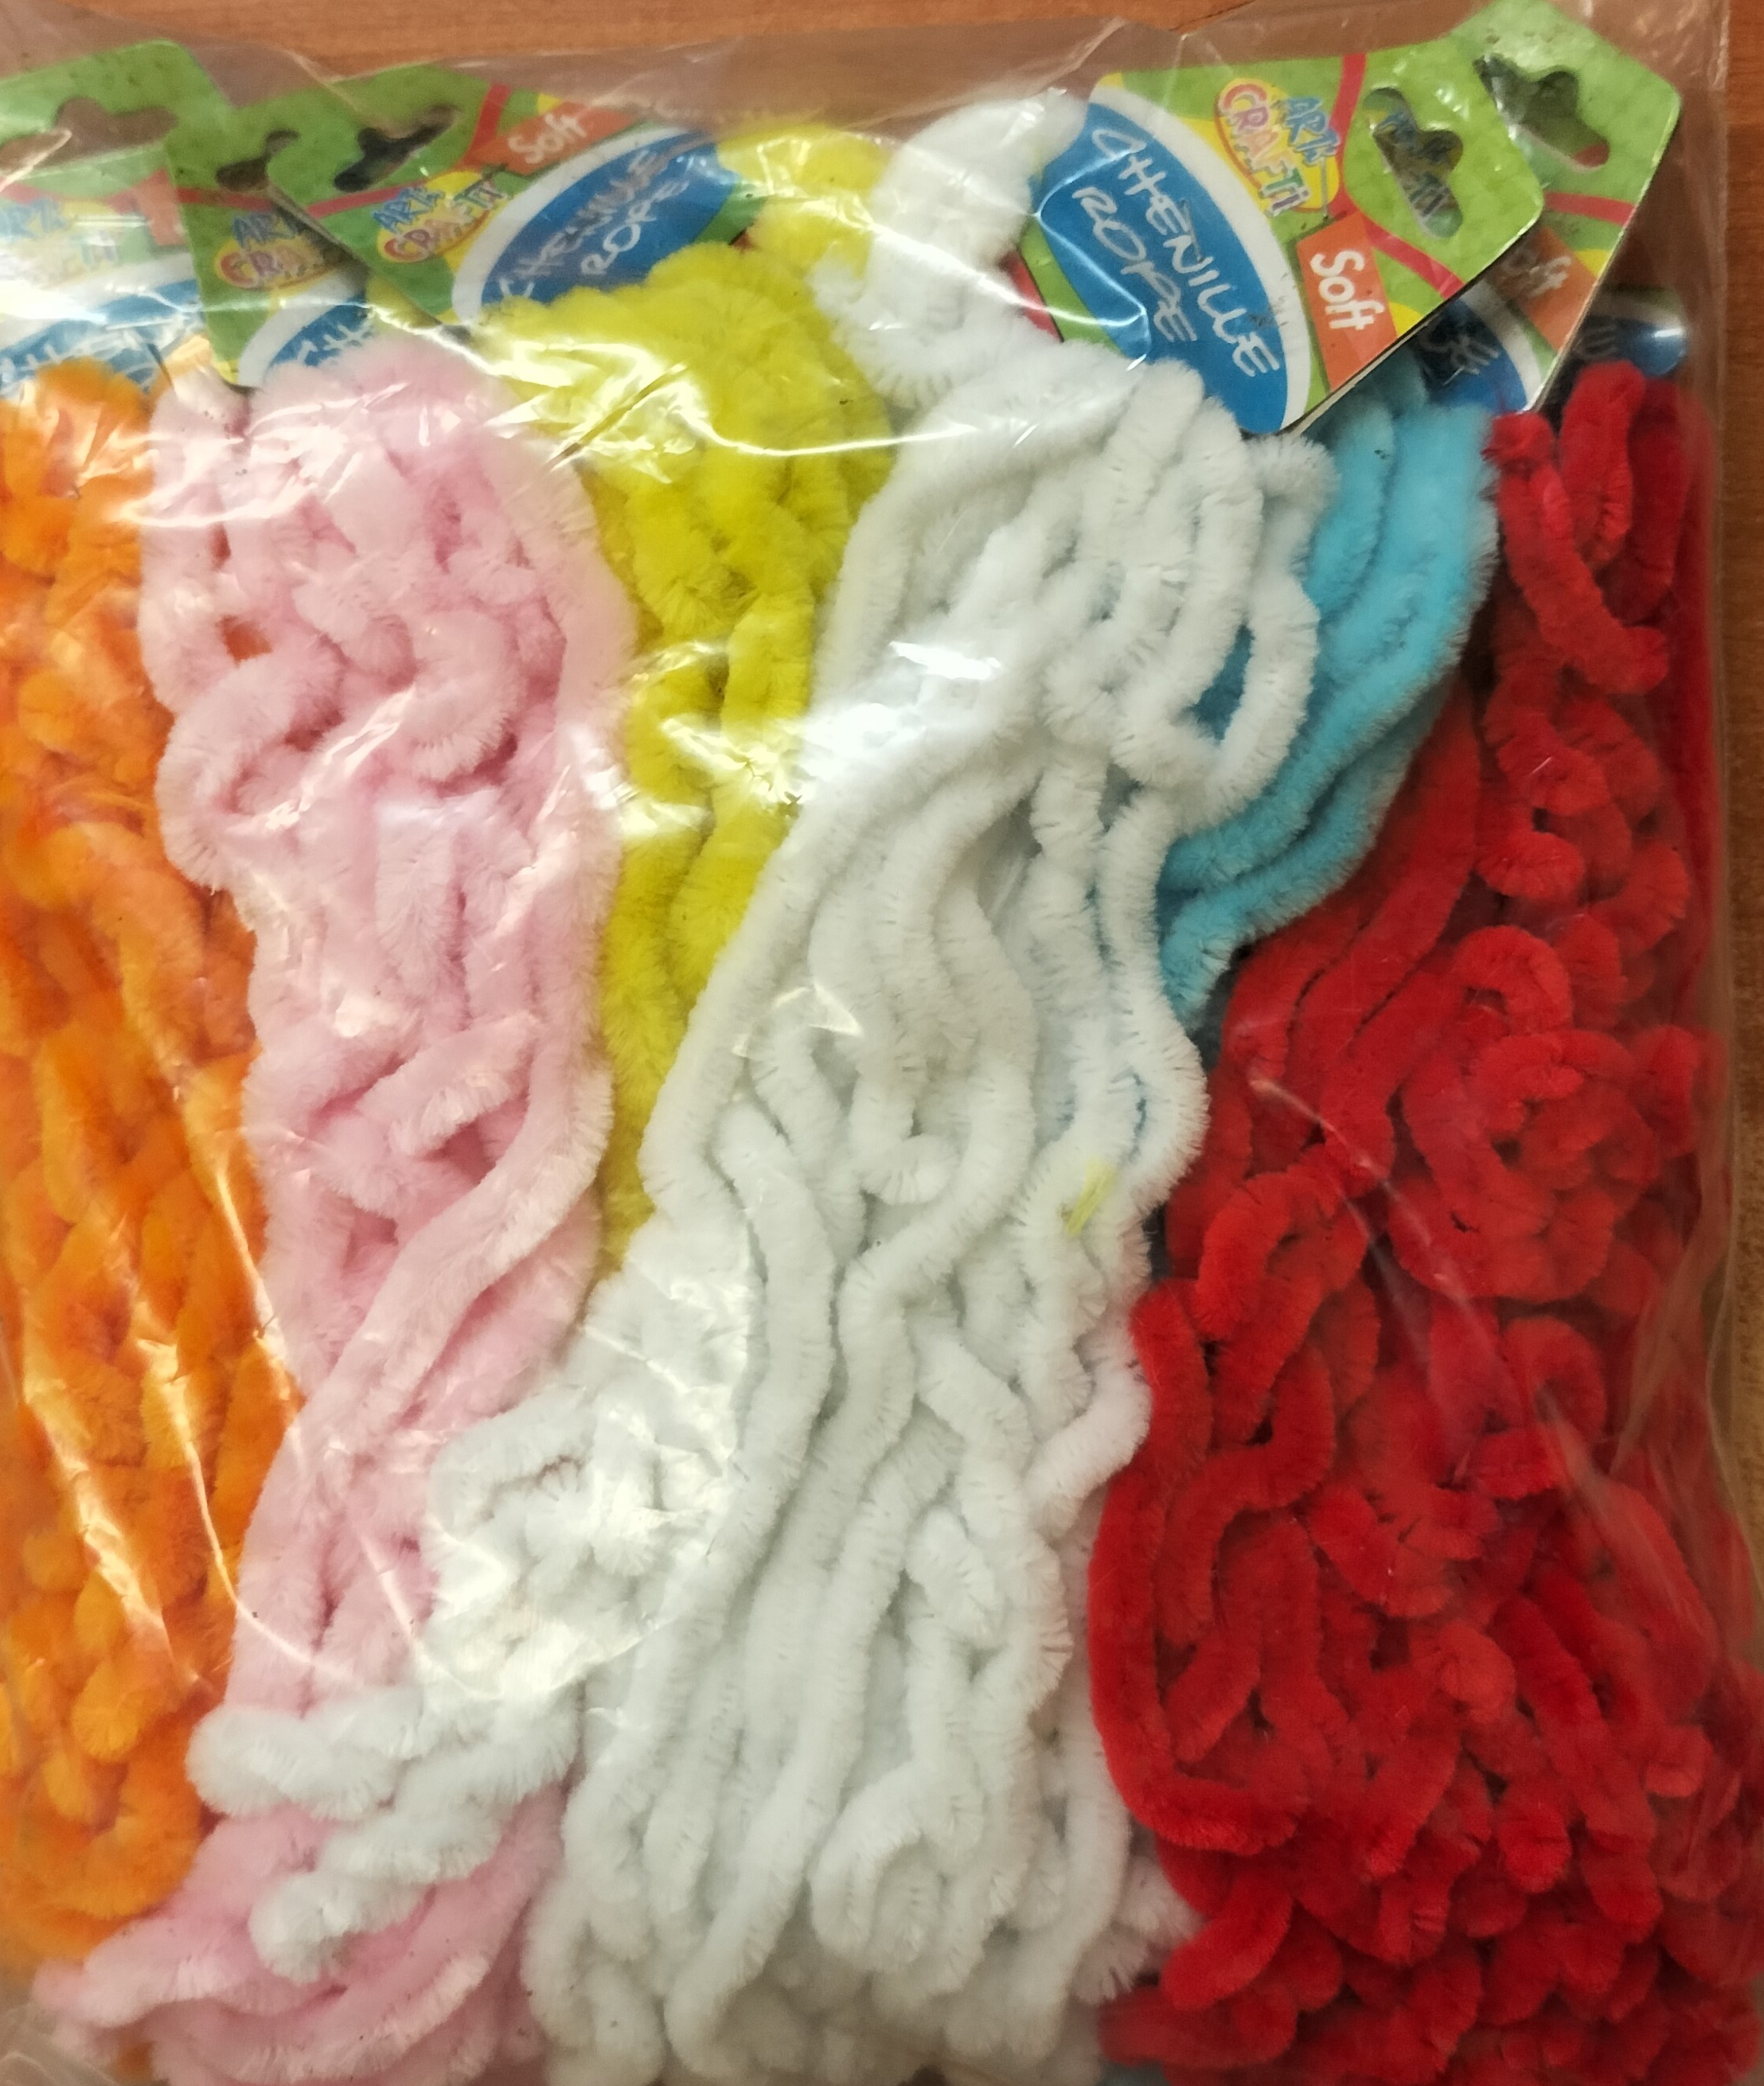 Chenille Rope 8mm 6 Cols. X 8 mtr ea Blue,Pk,Or,Red,Wh,Yel.